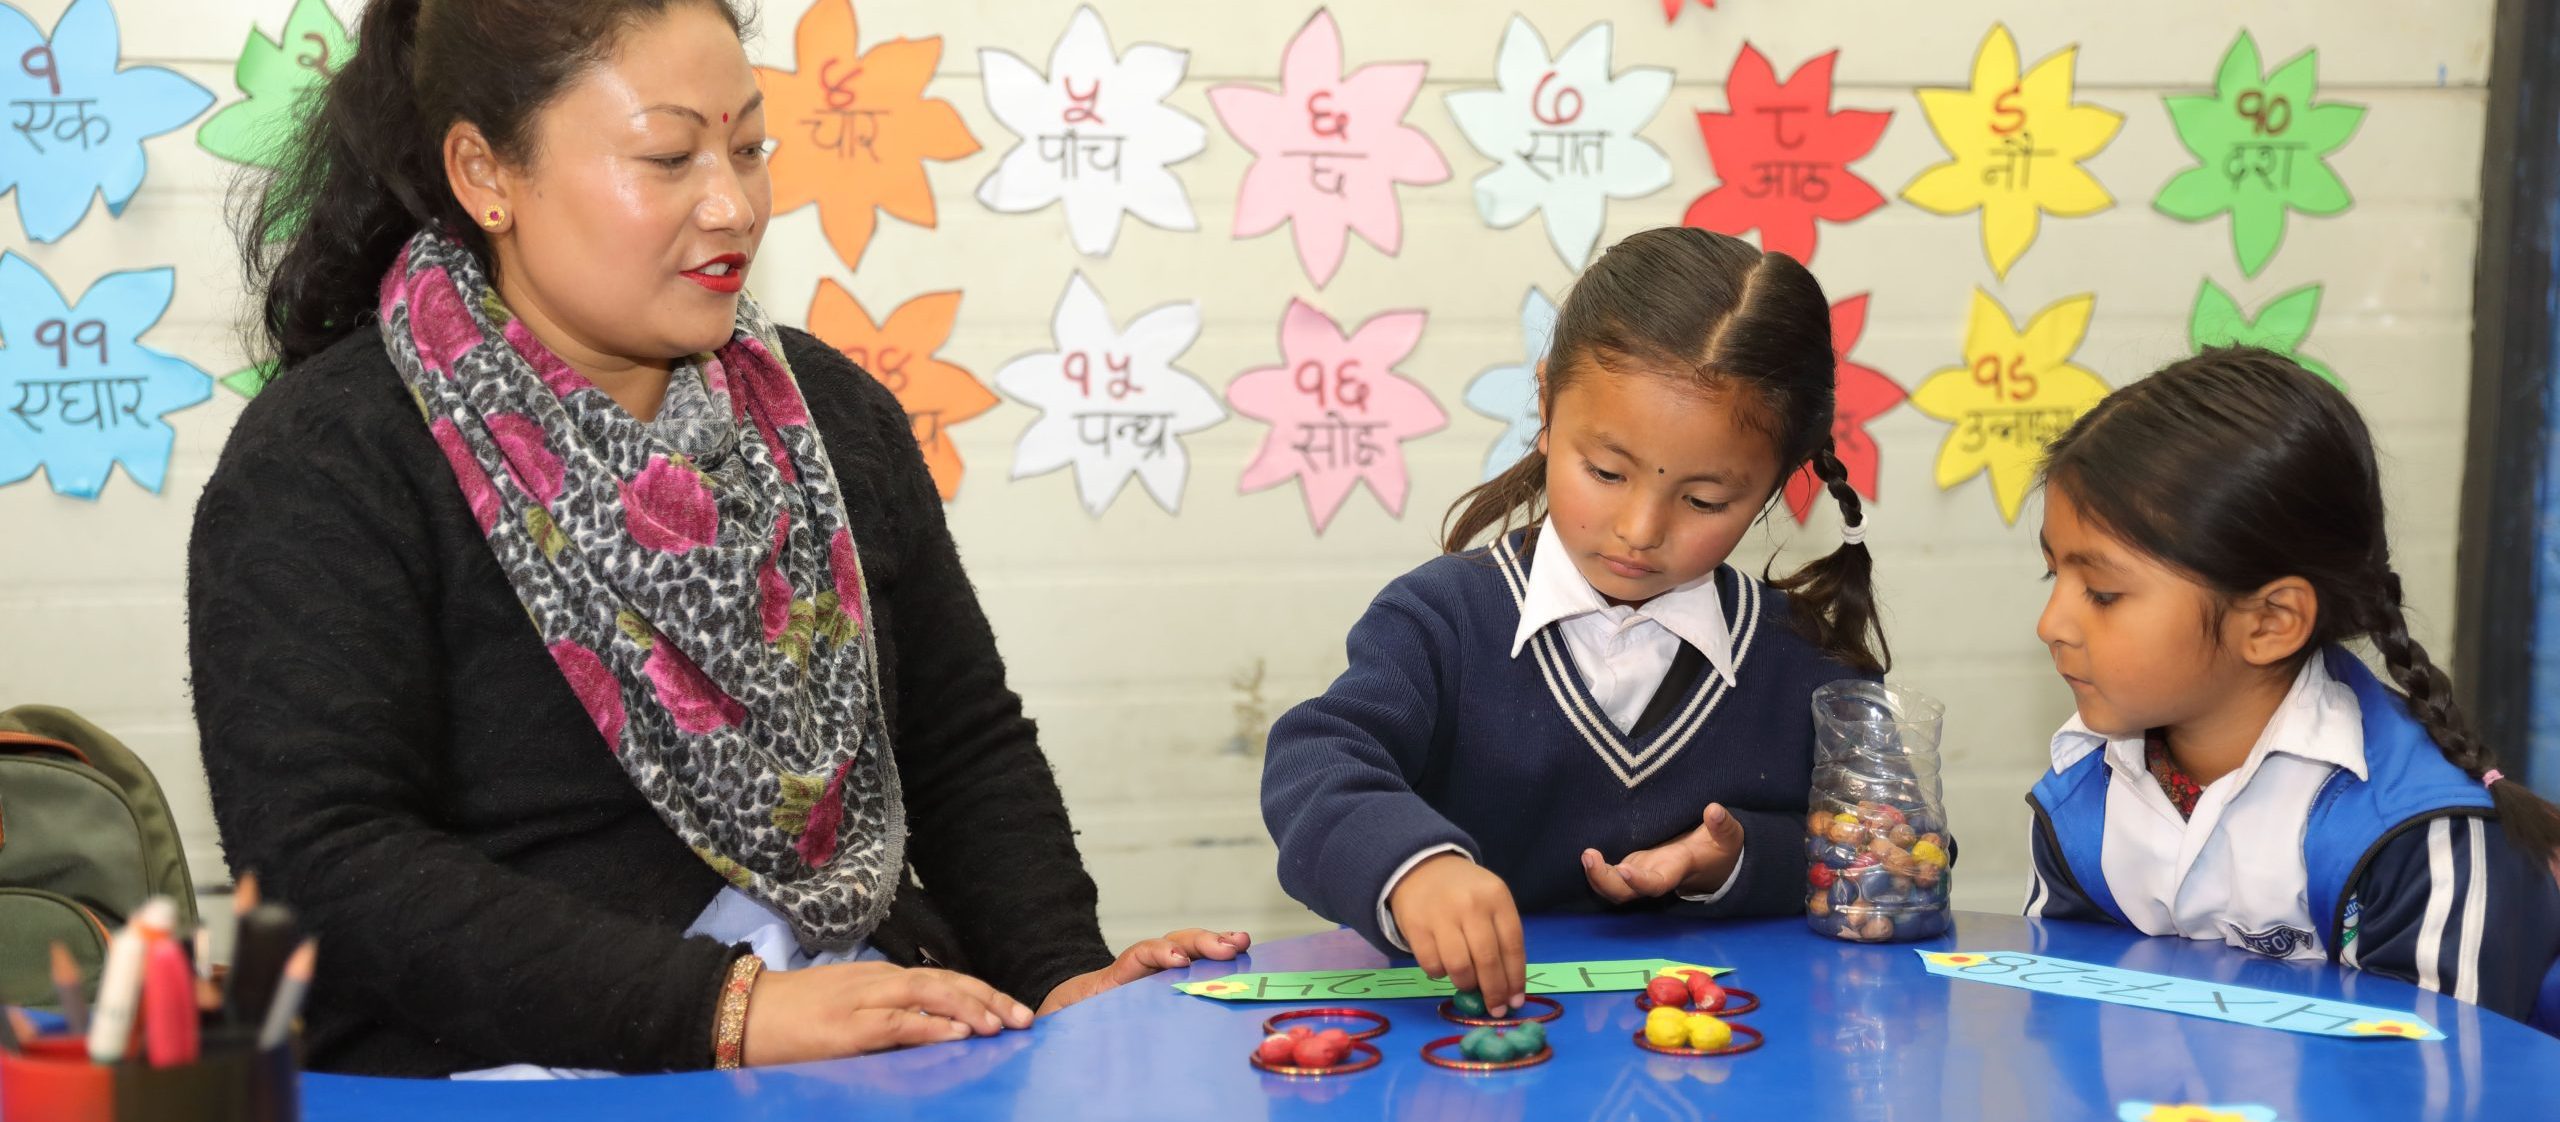 Oxford Practical English School offers a Montessori Based Pre-Level Program that focuses on early childhood development. Here are the key aspects of their Montessori Education.